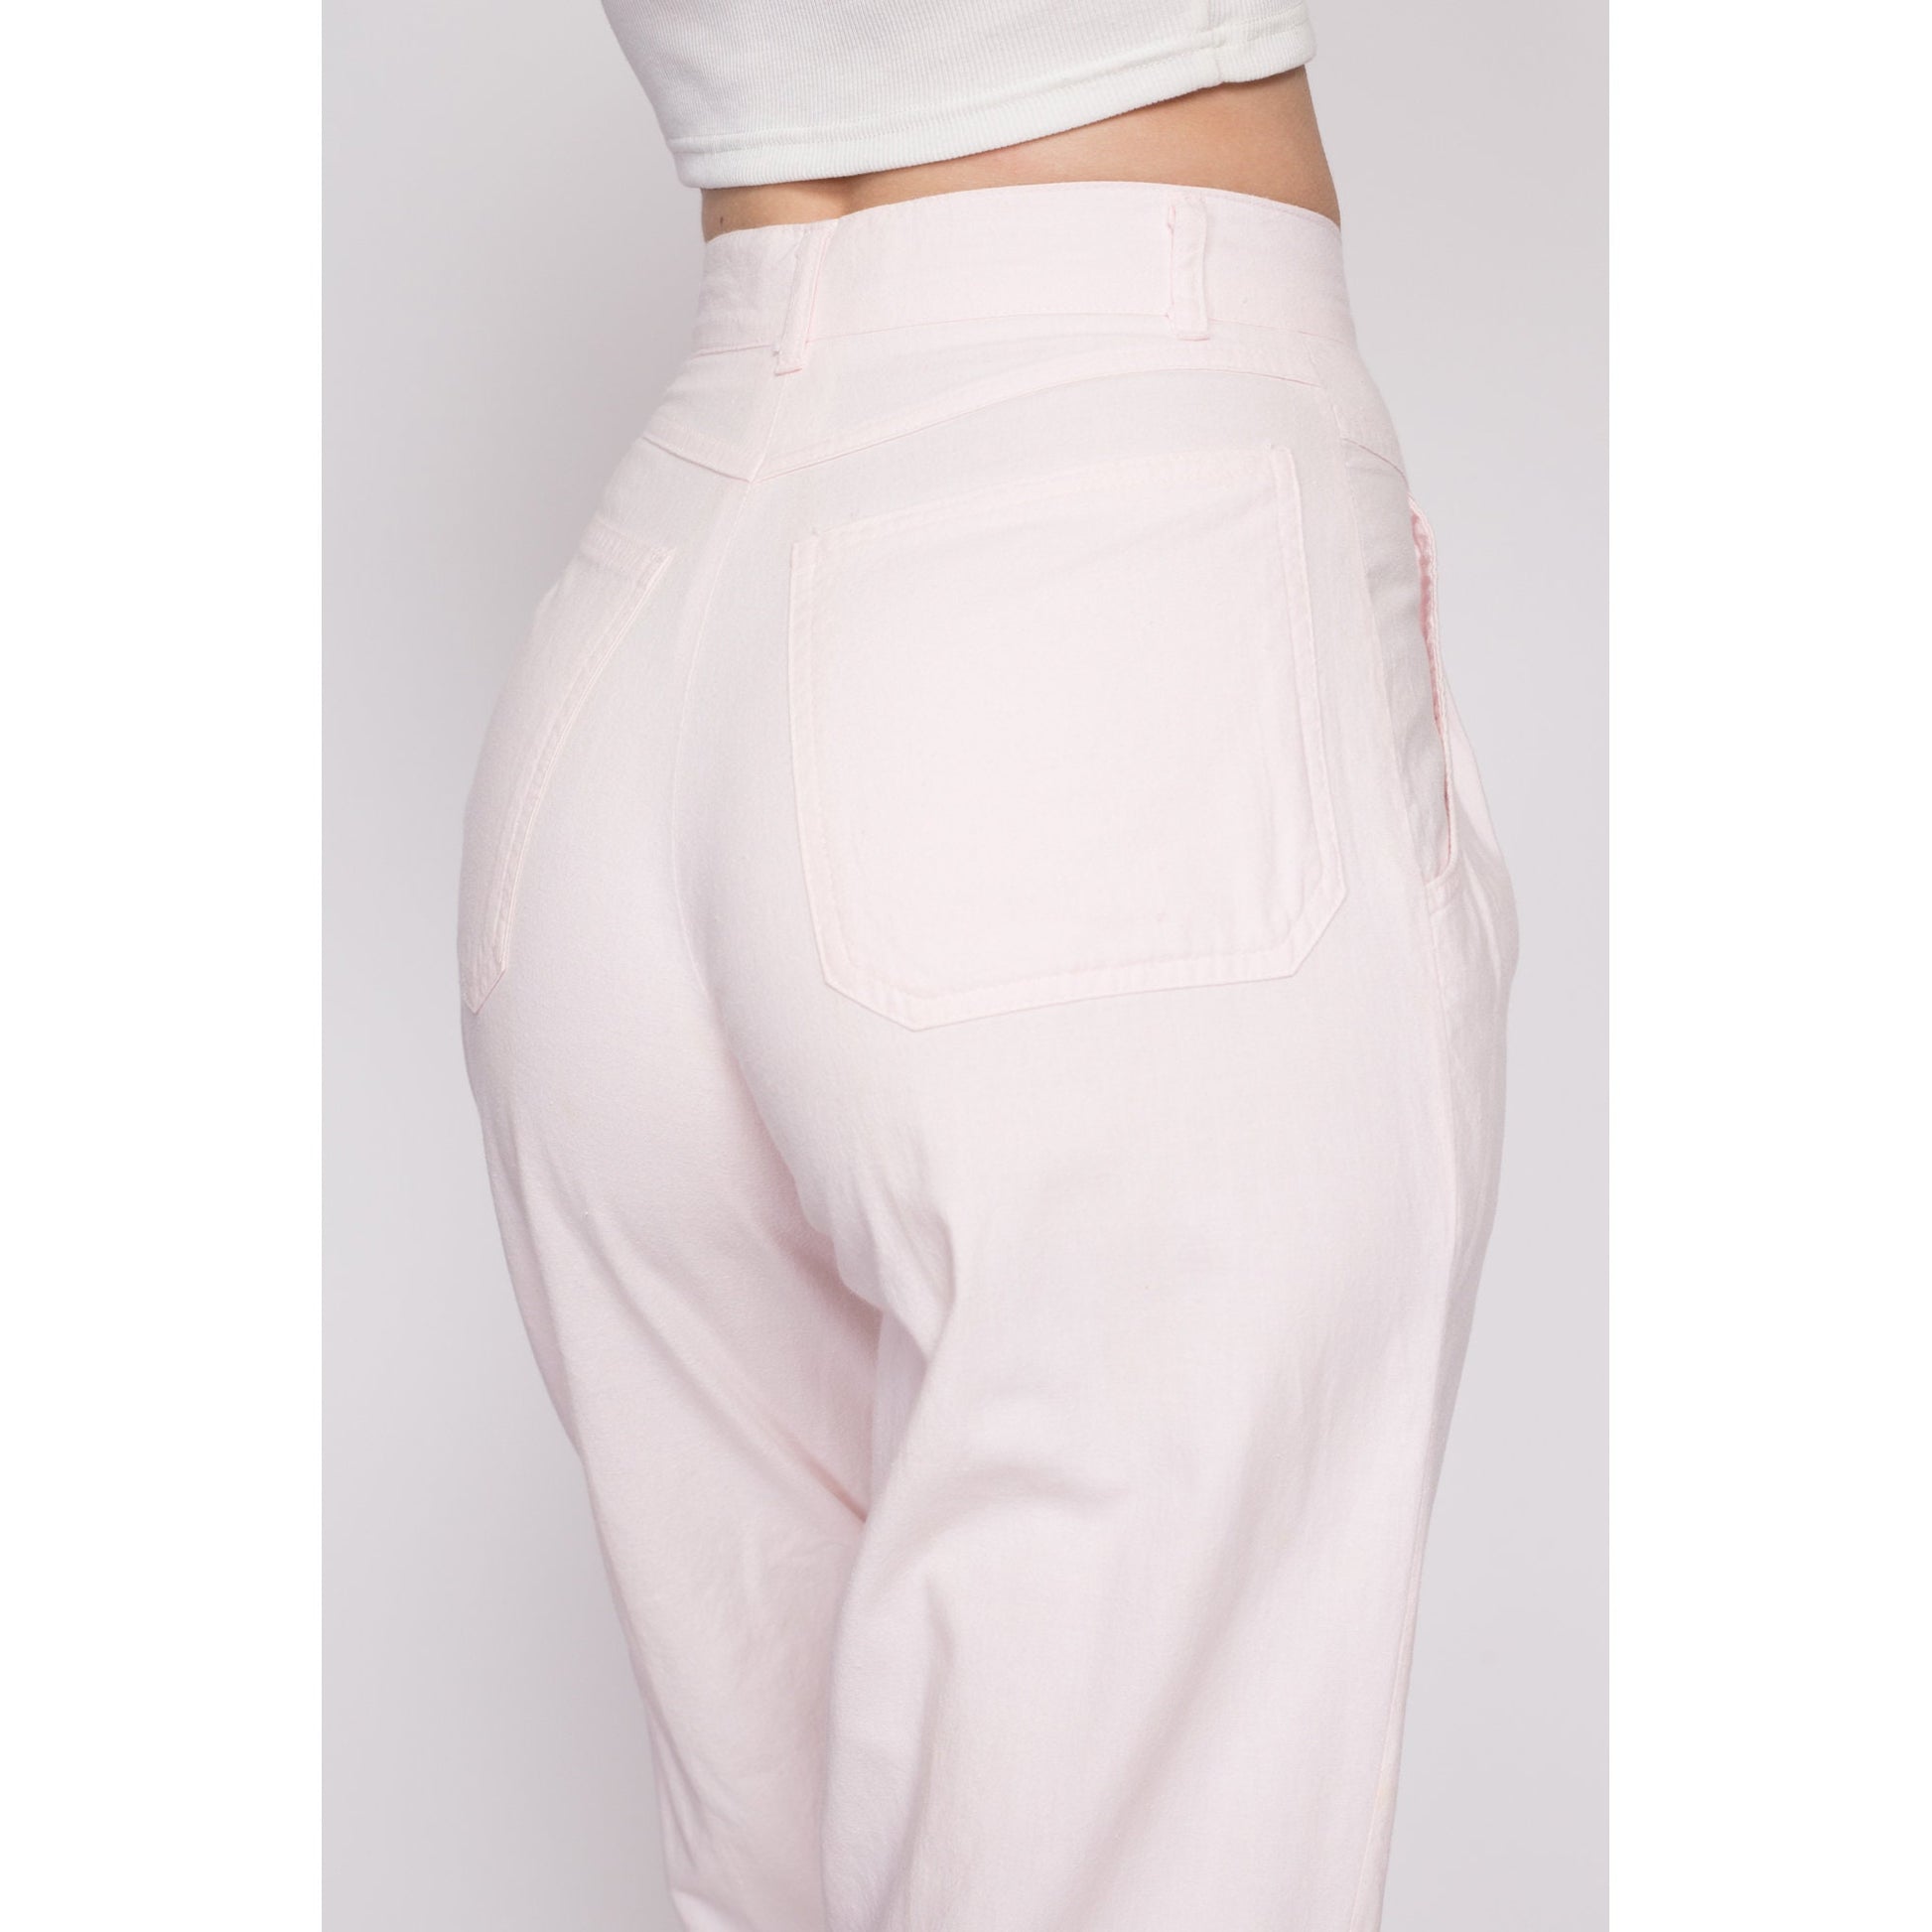 XS 80s Pastel Pink High Waisted Pants 23